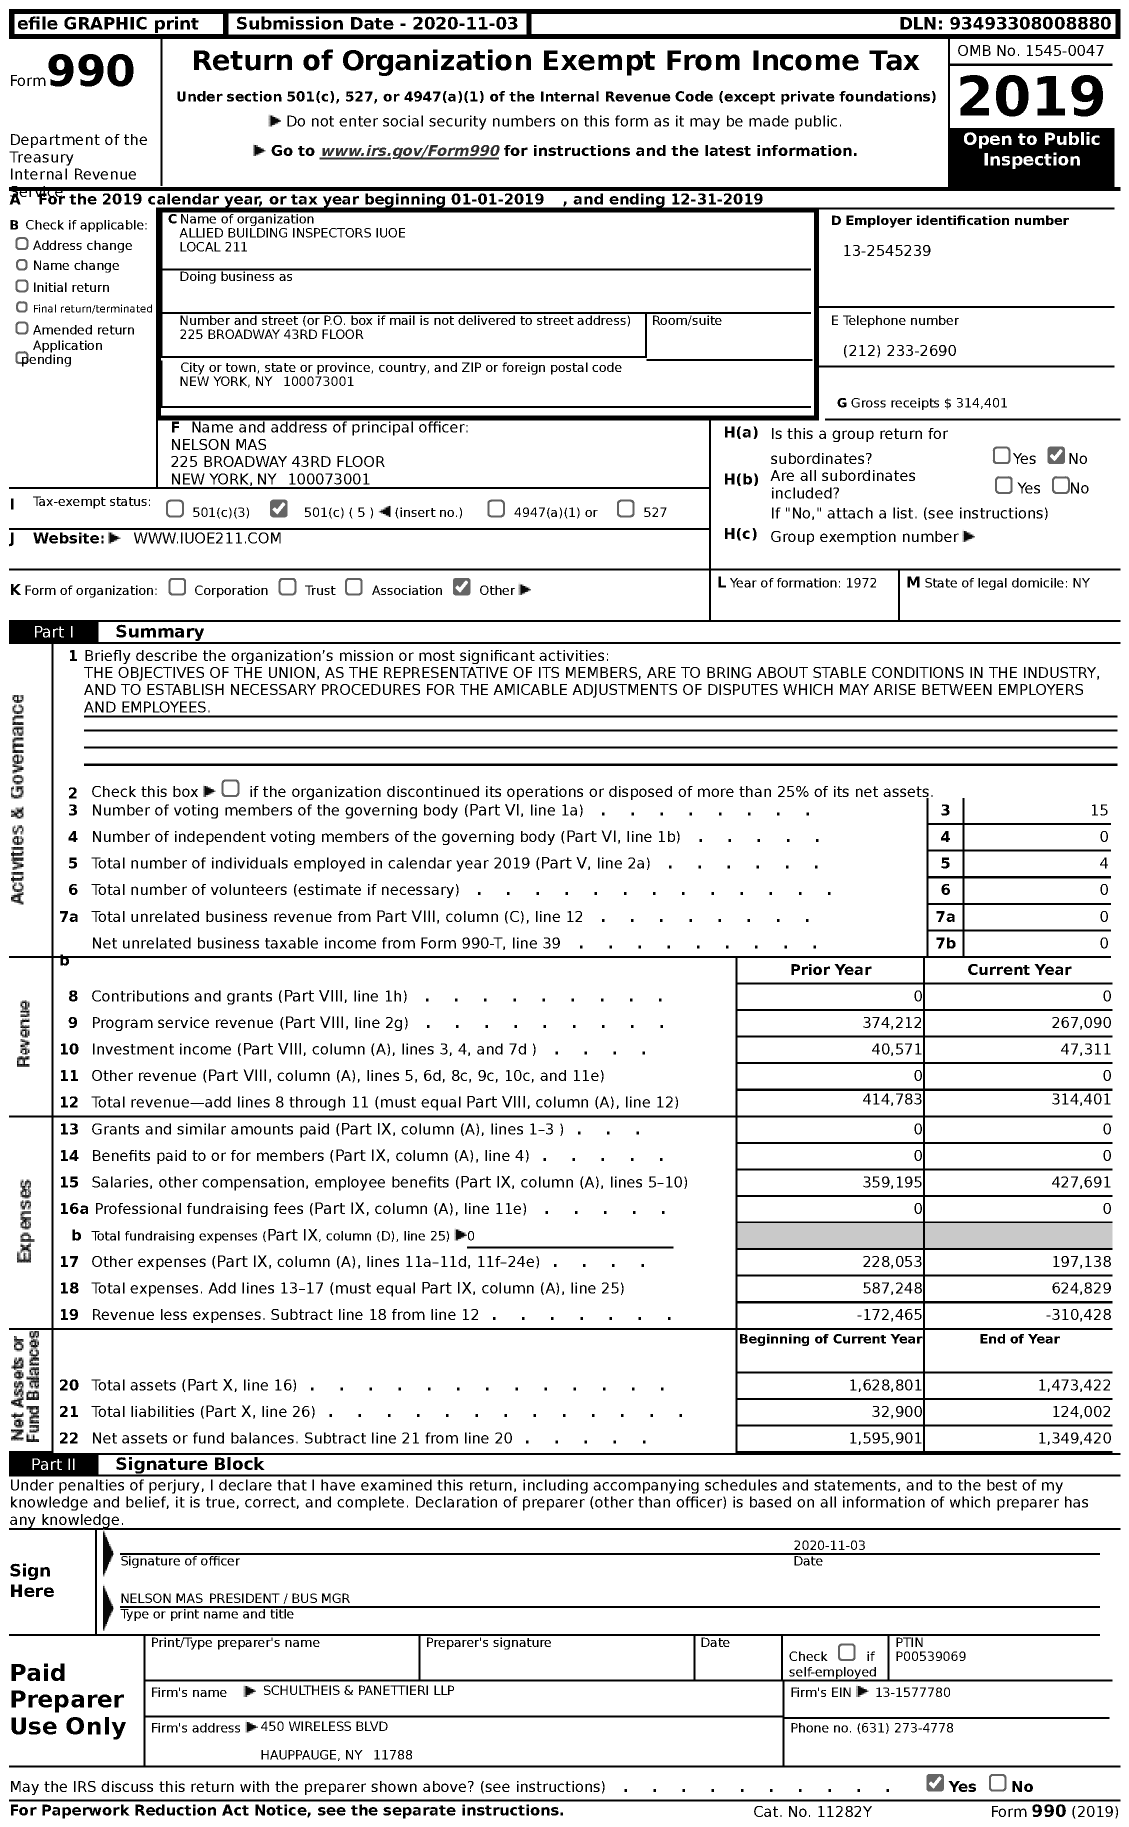 Image of first page of 2019 Form 990 for Allied Building Inspectors Iuoe Local 211